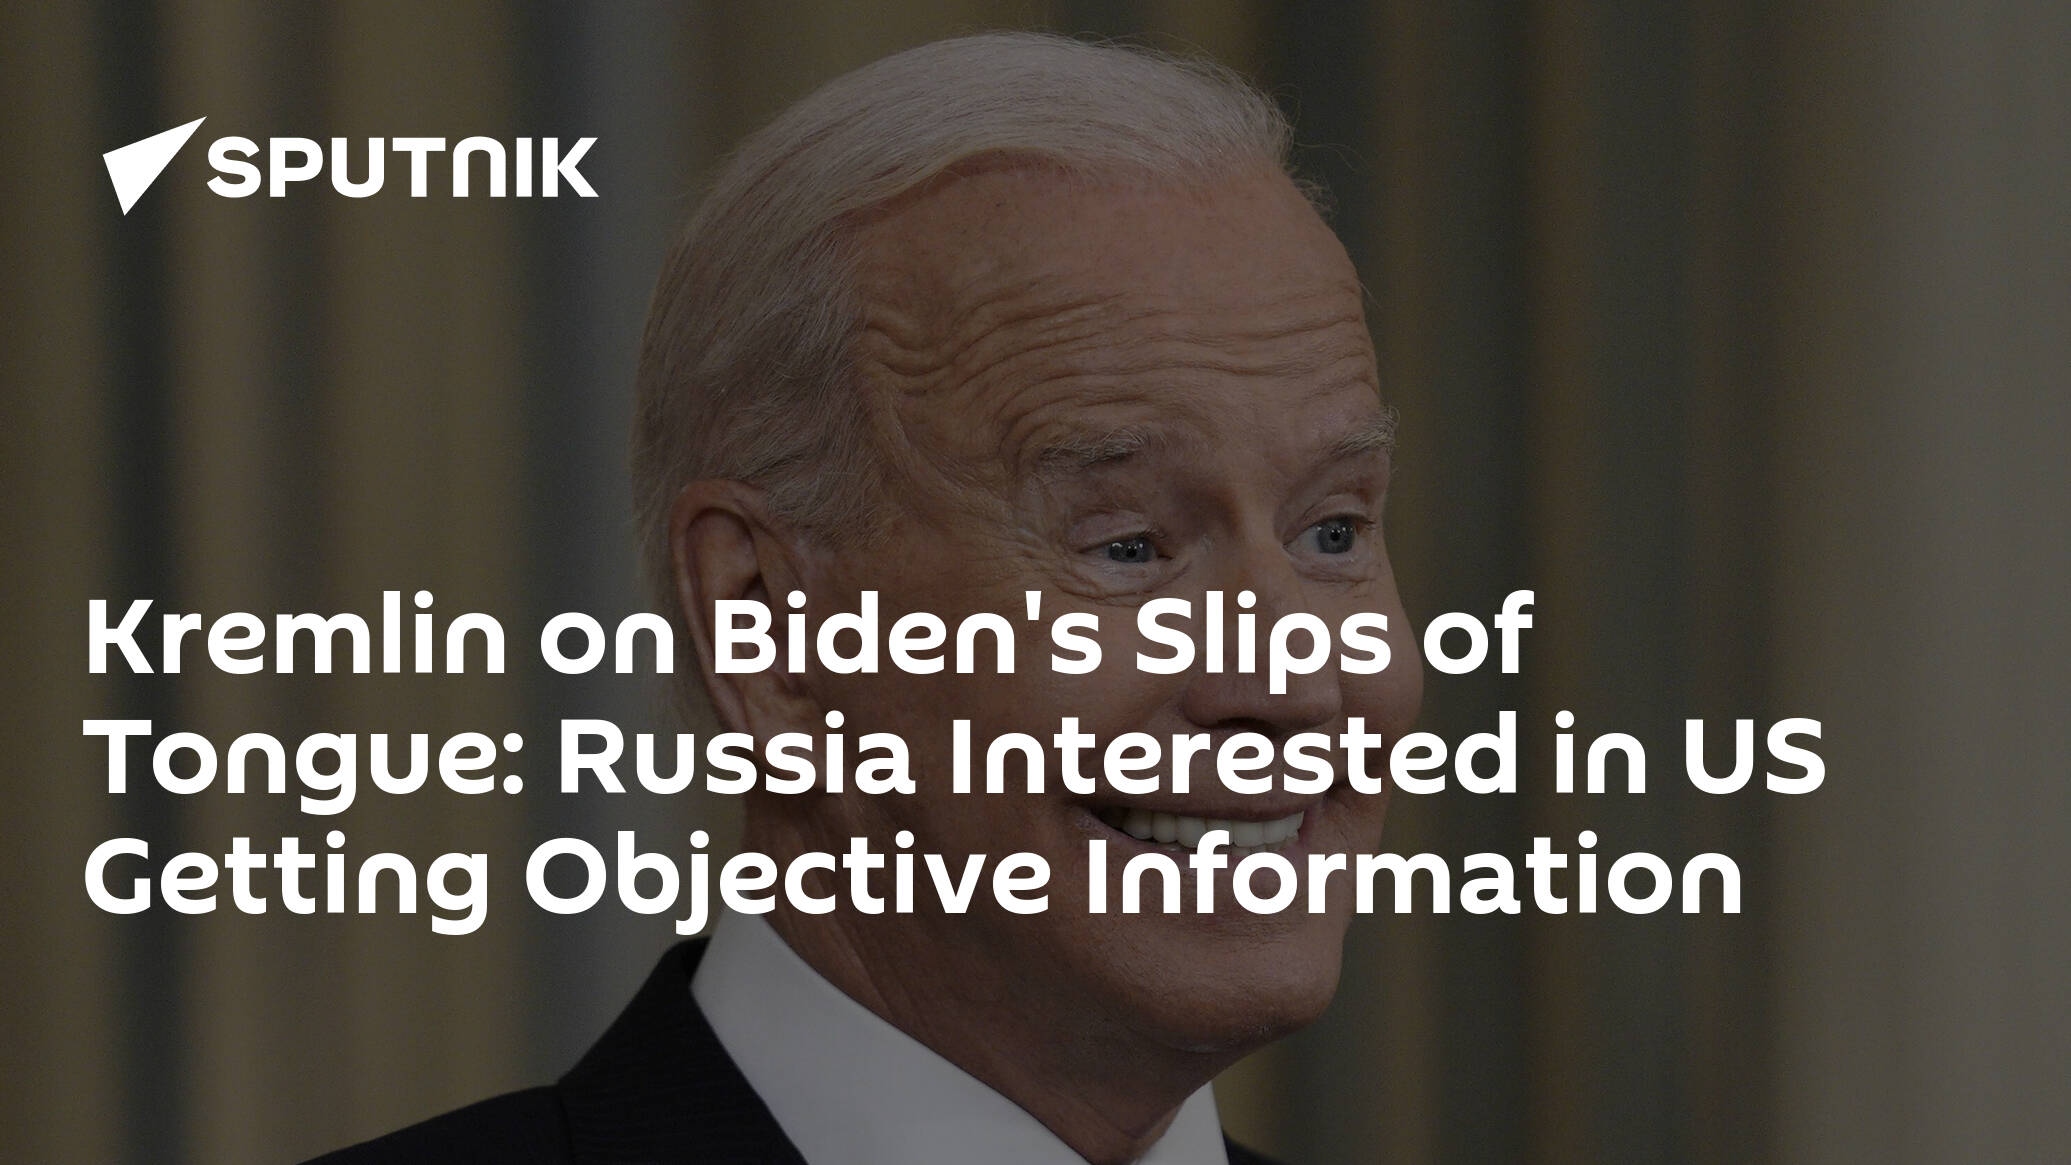 Kremlin on Biden's Slips of Tongue: Russia Interested in US Getting Objective Information